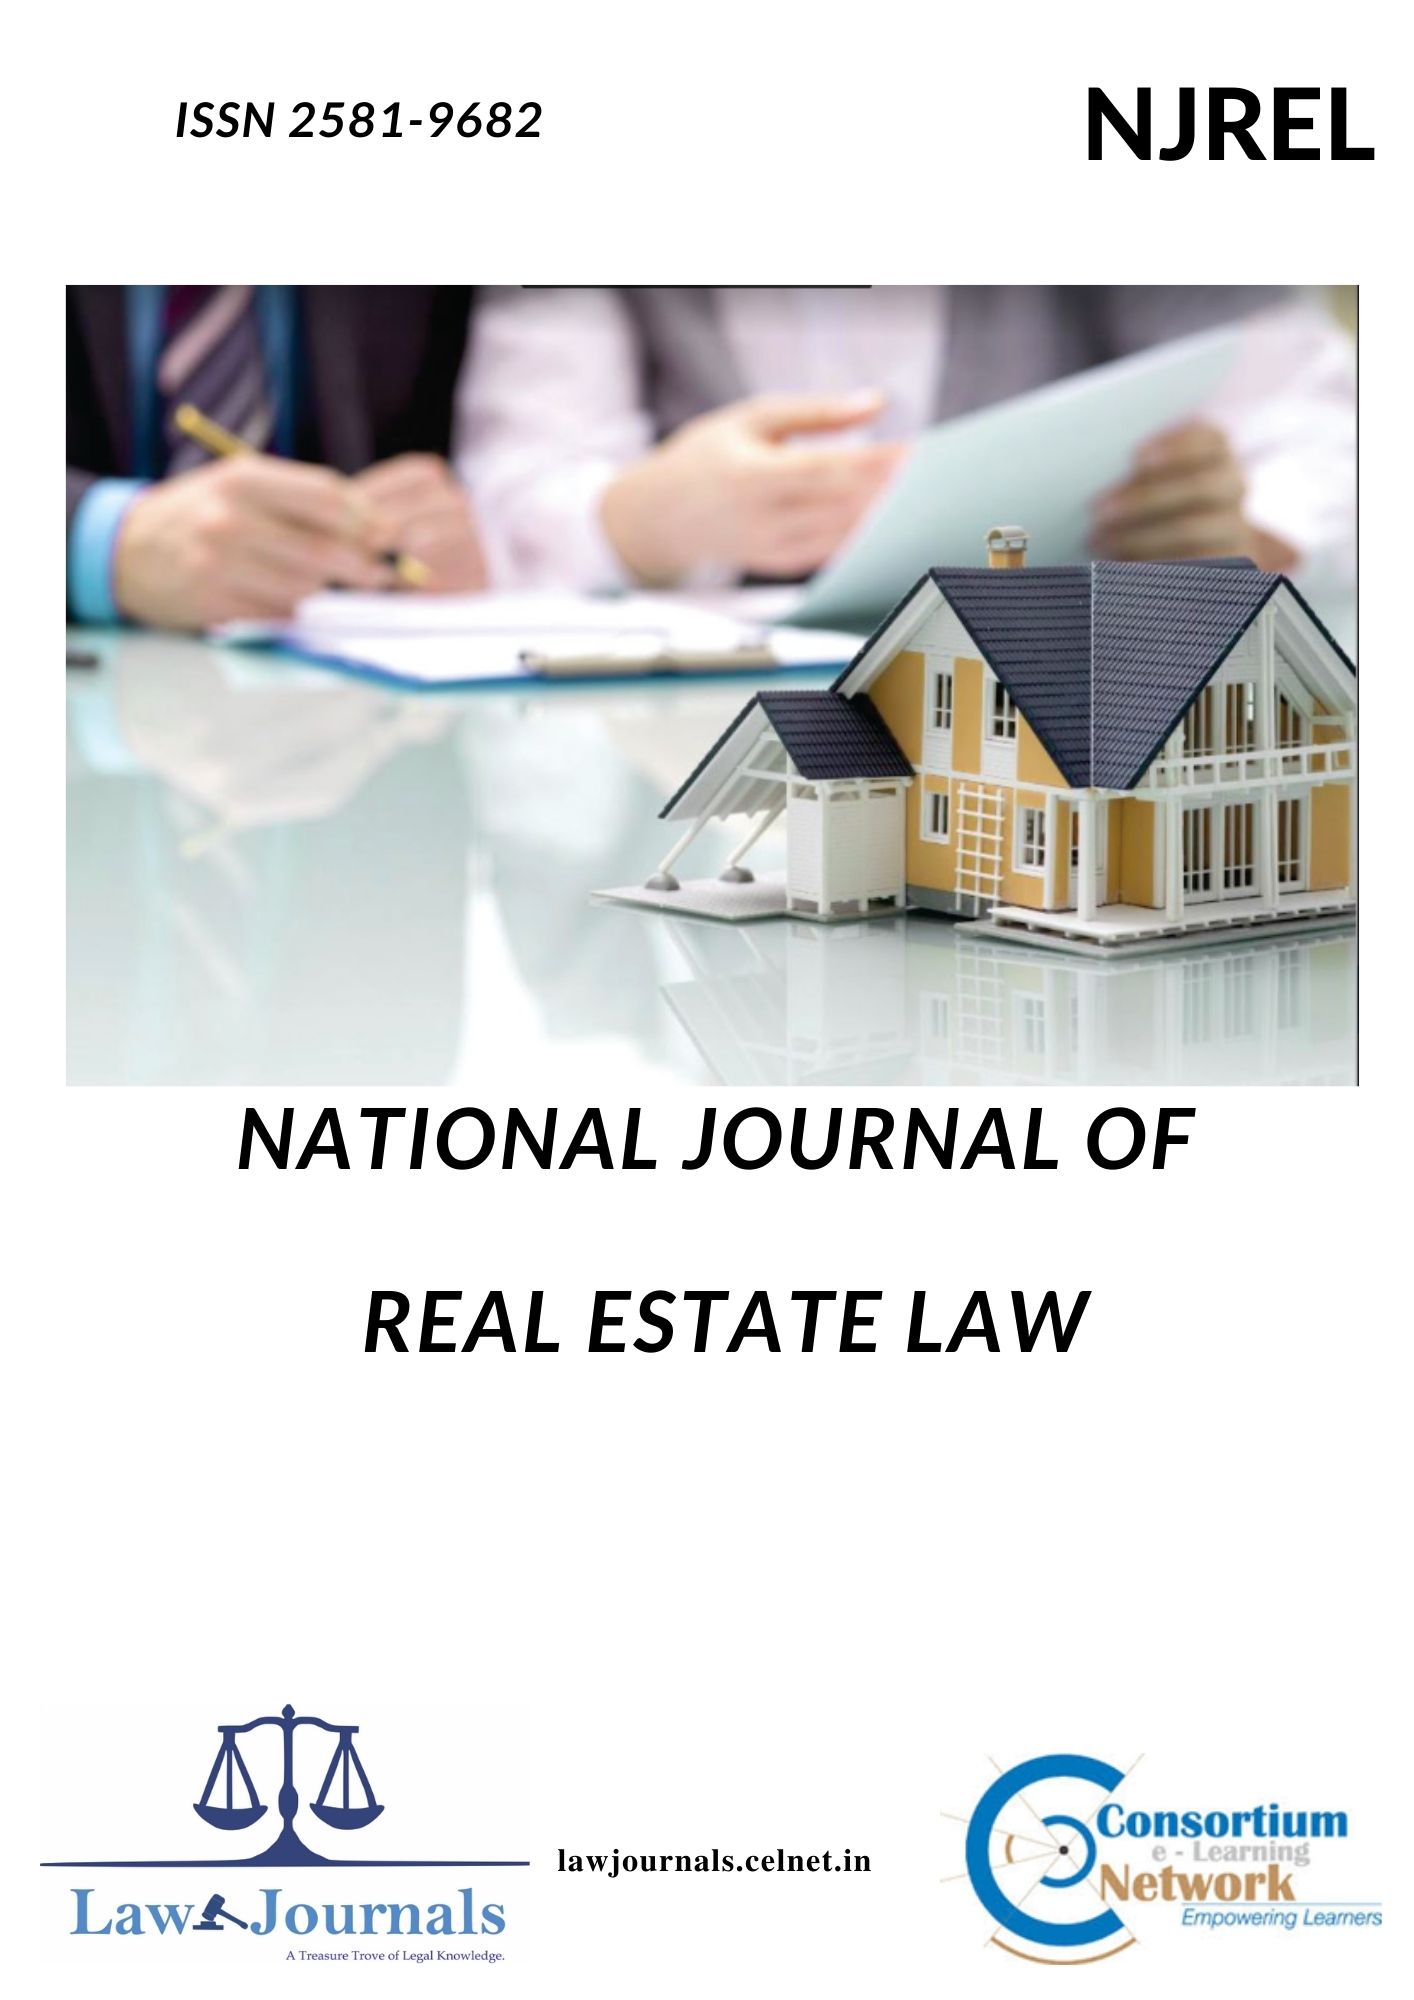 NATIONAL JOURNAL OF REAL ESTATE LAW